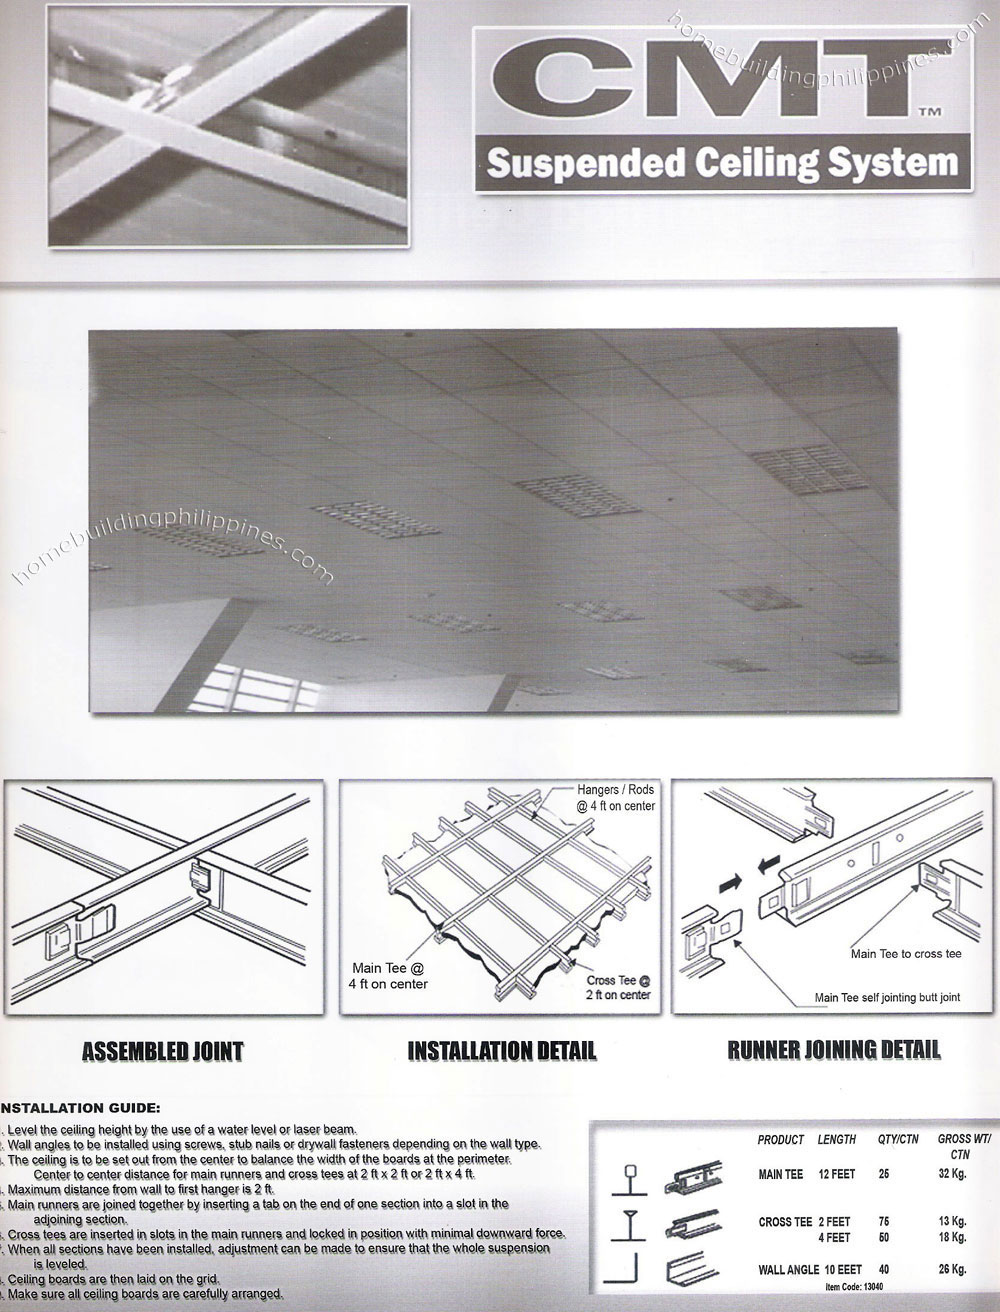 Cmt Suspended Ceiling System Philippines